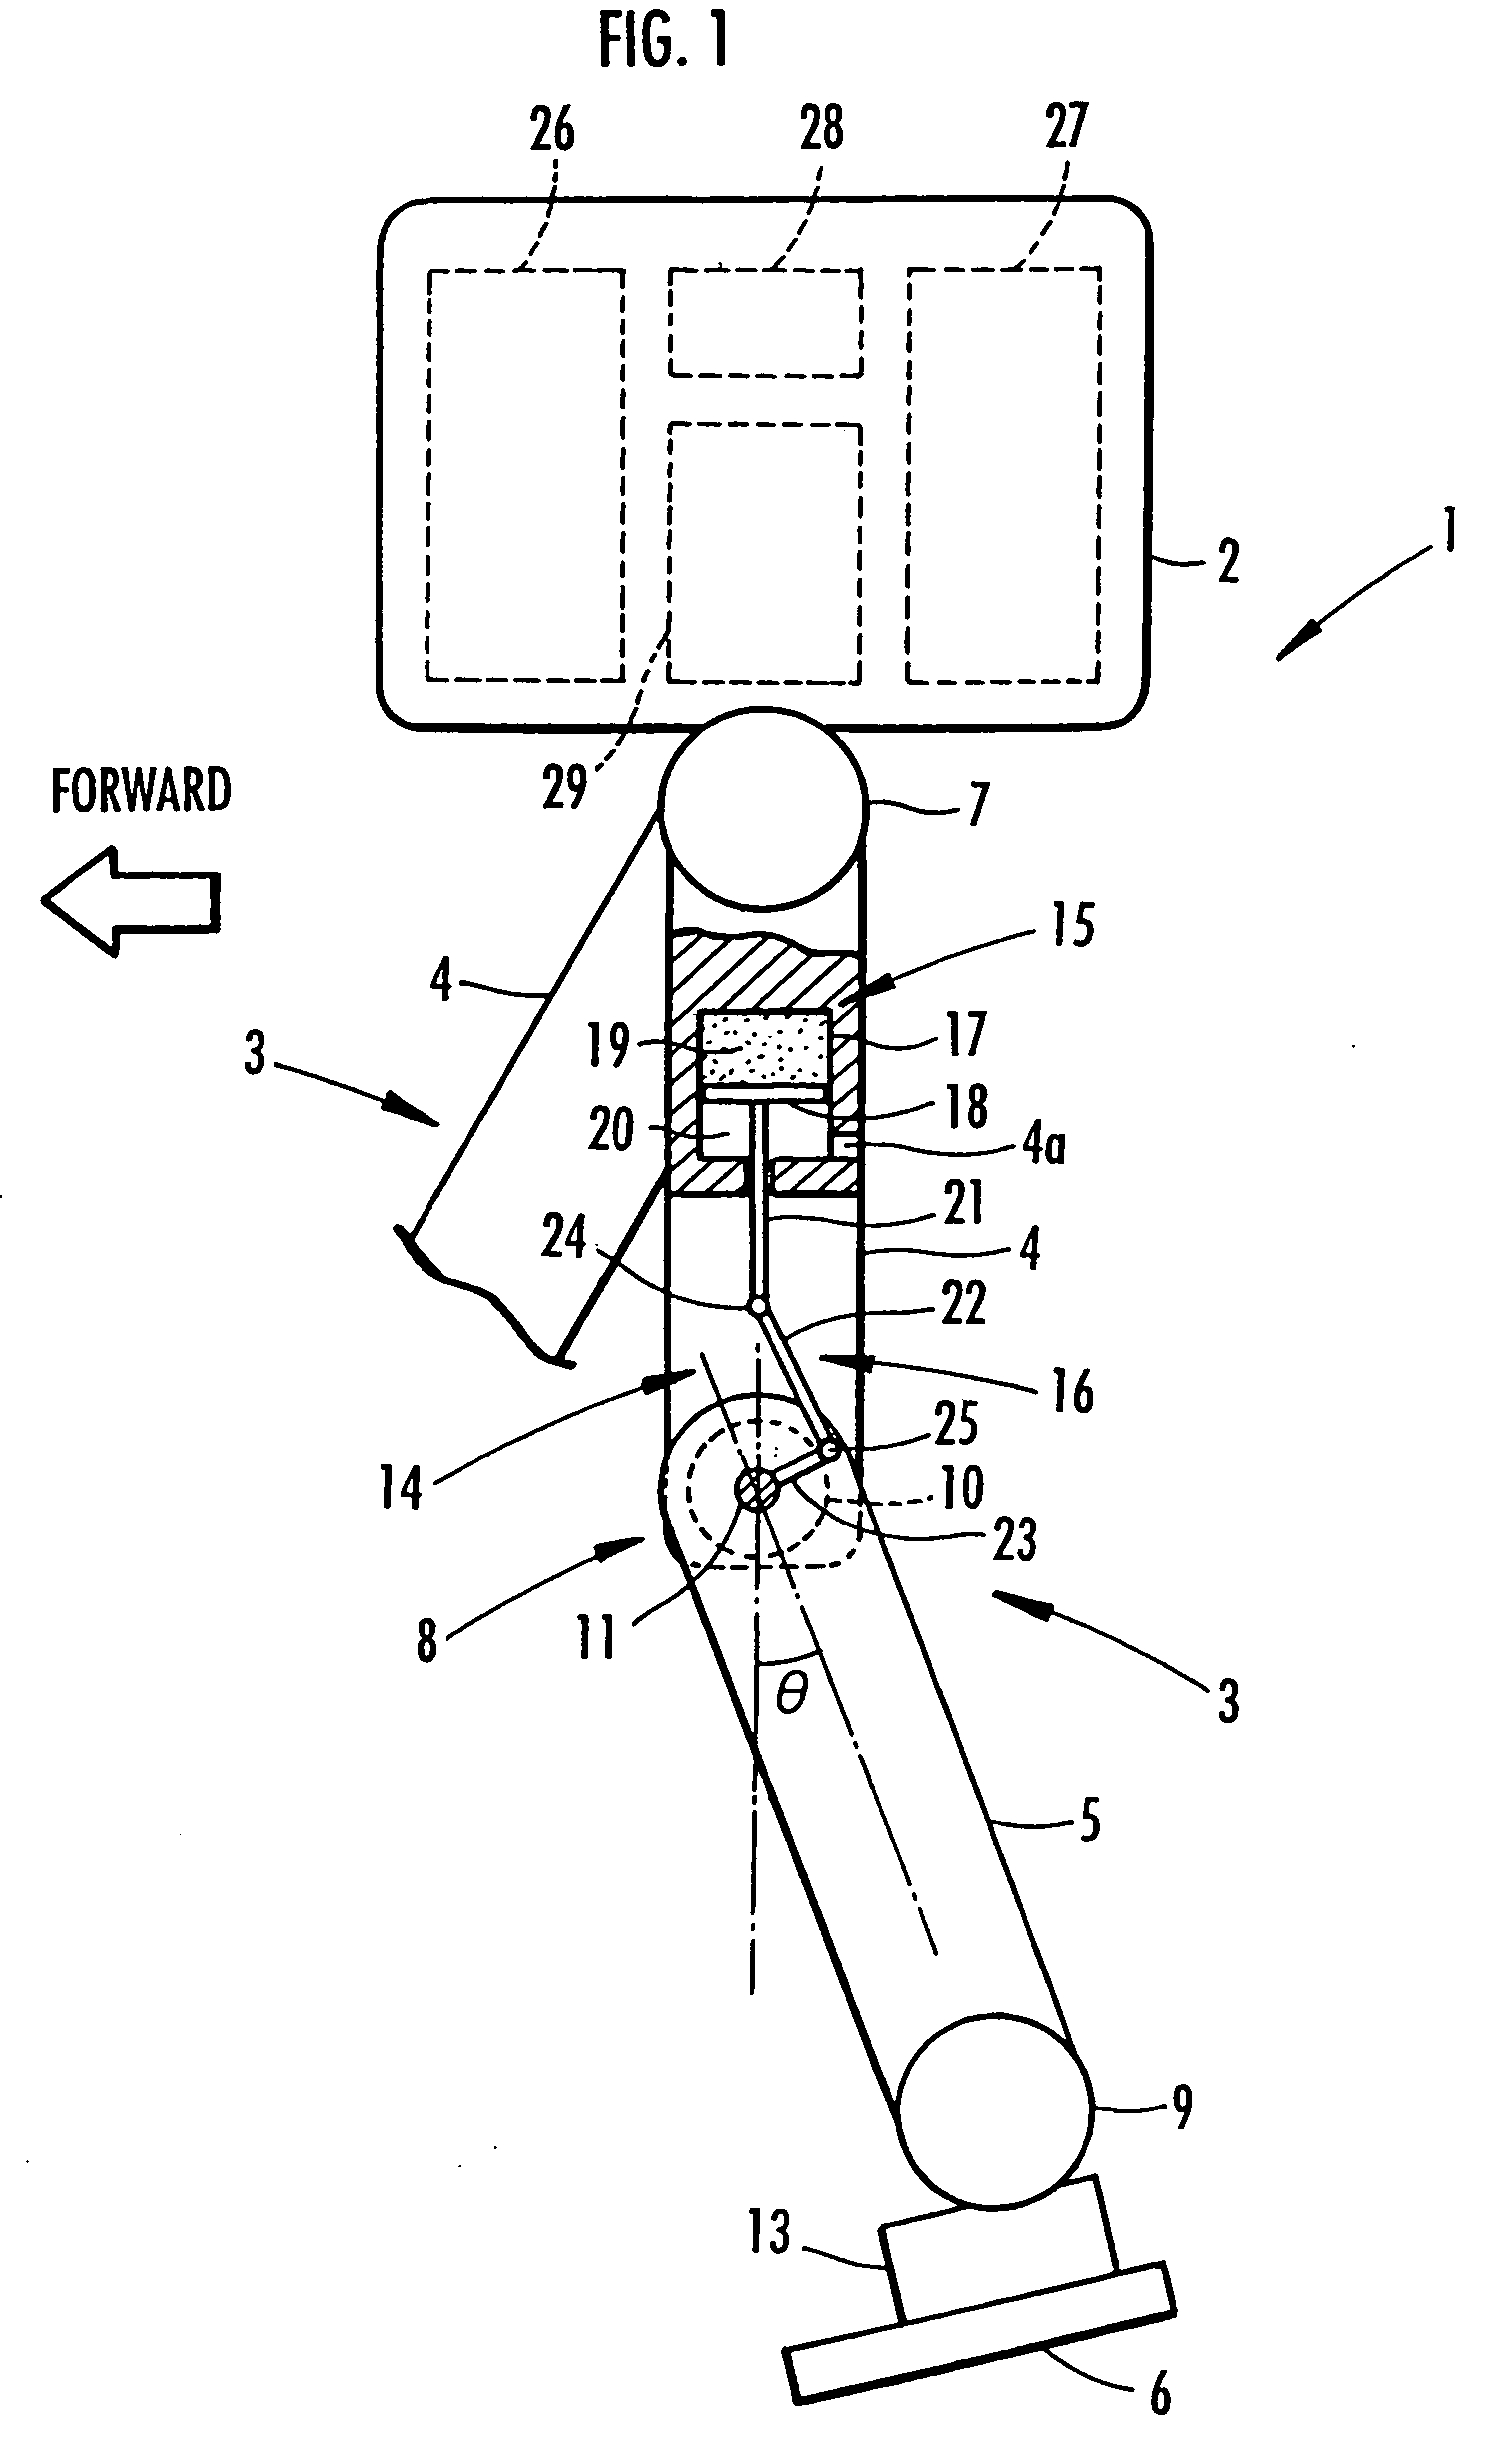 Leg joint assist device for legged movable robot